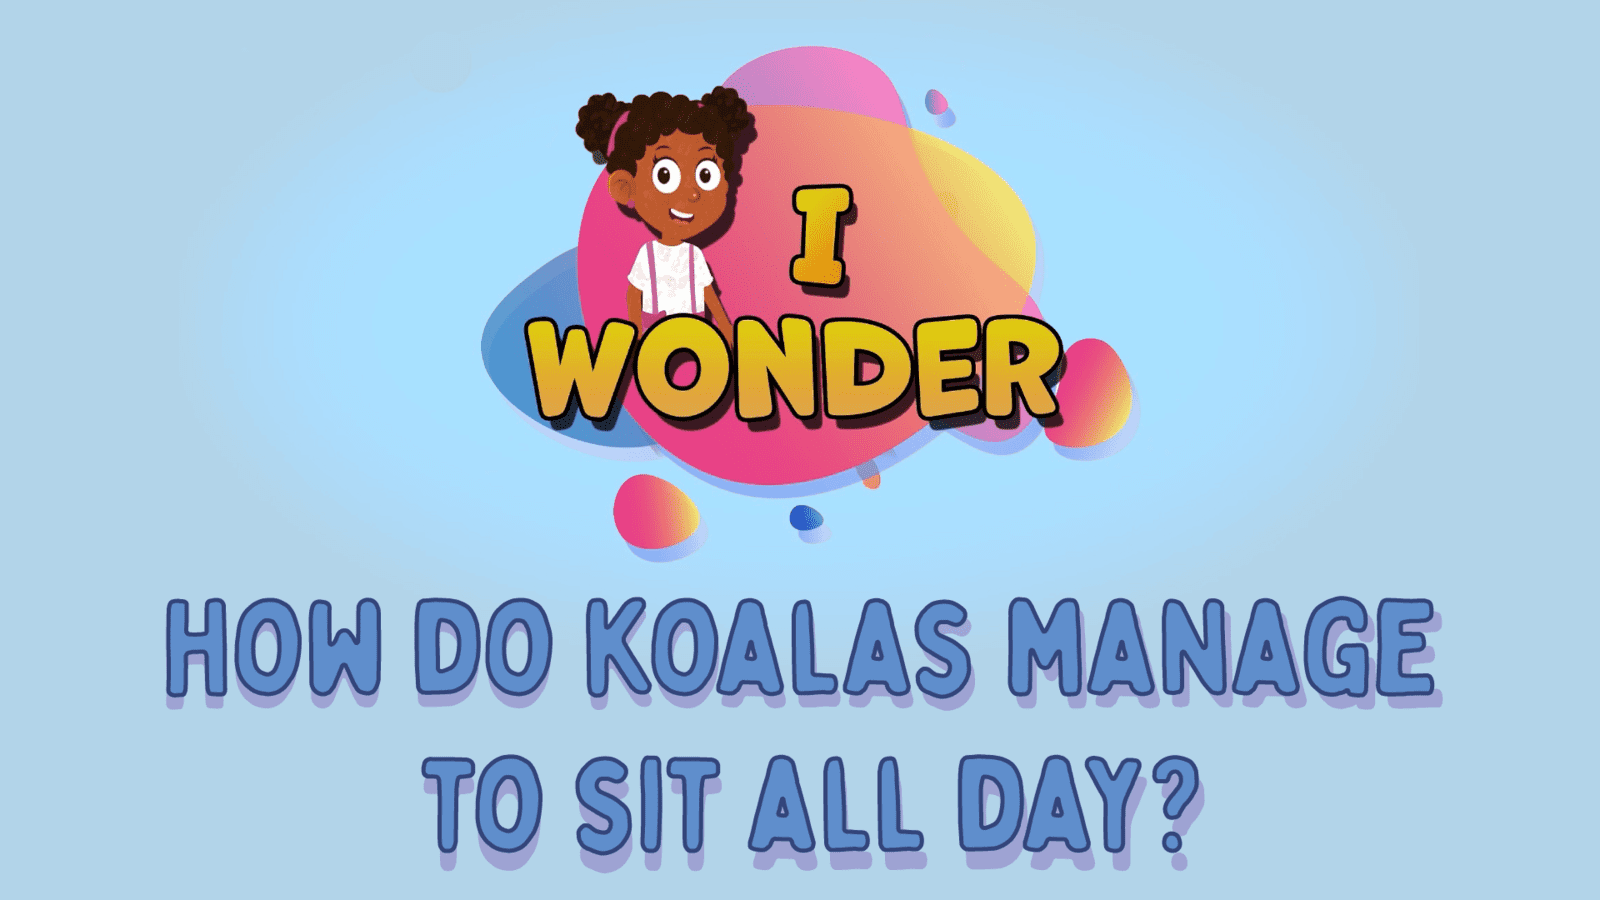 How Do Koalas Manage To Sit All Day?